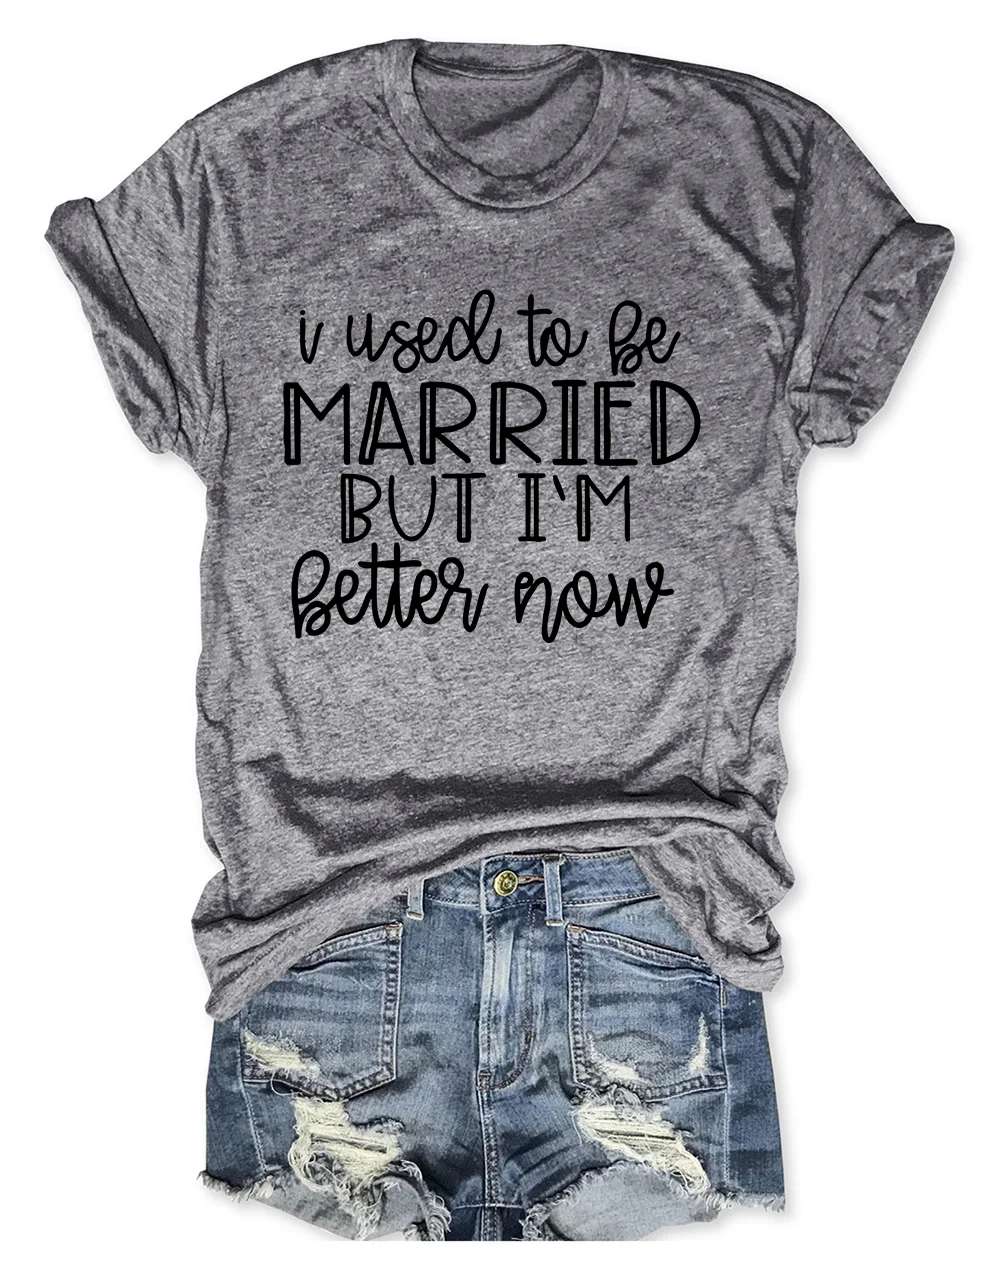 I Used To Be Married But I'm Better Now T-Shirt